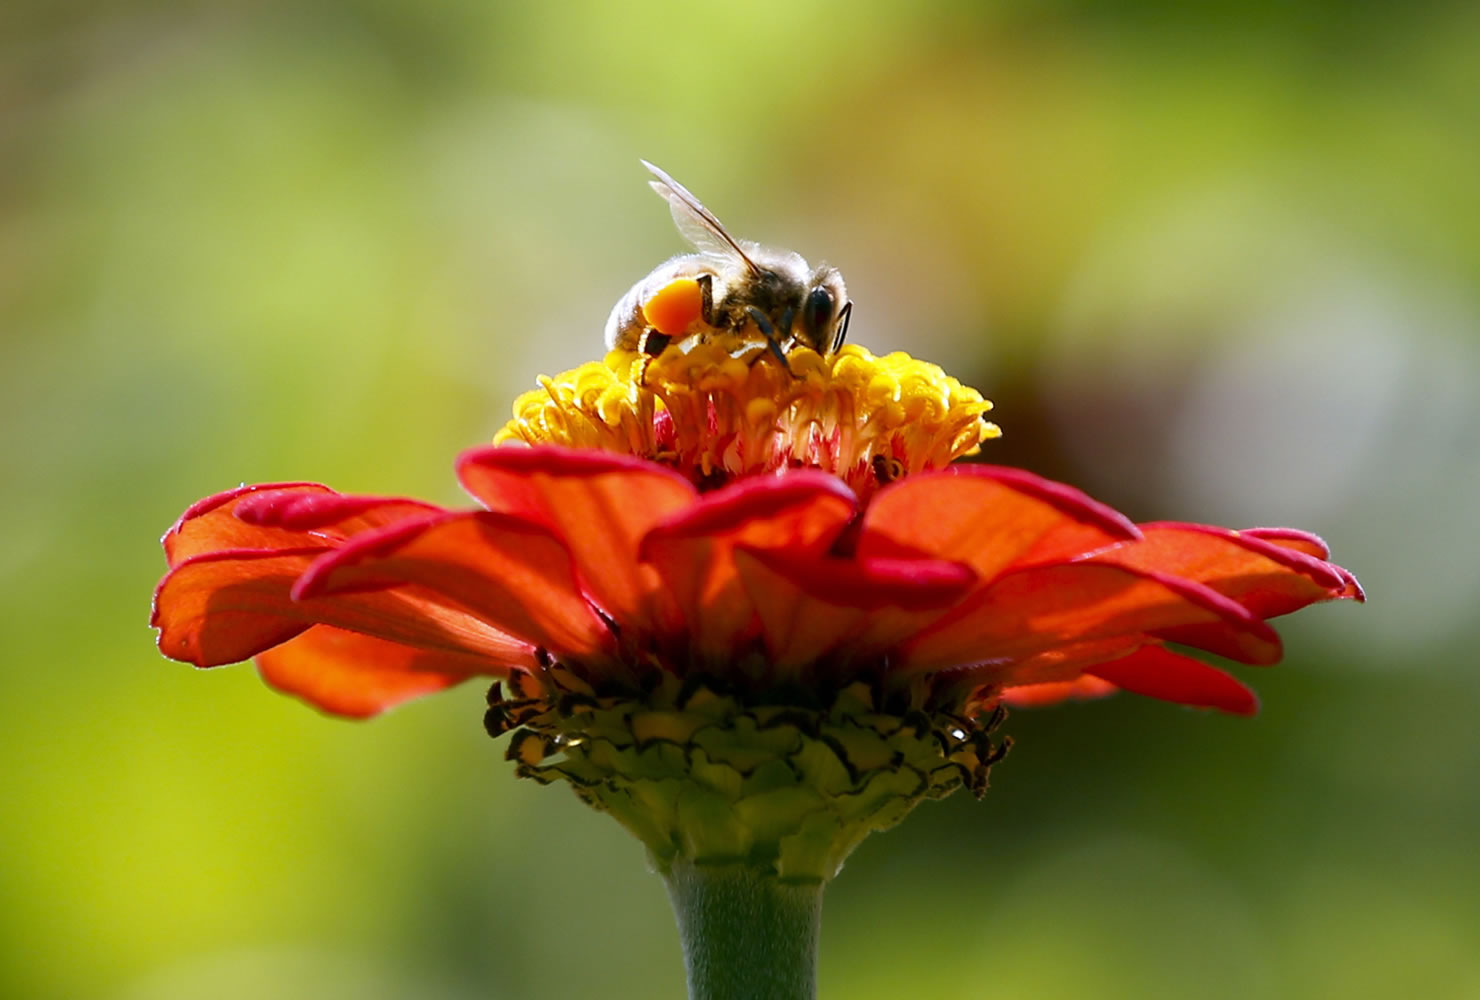 FILE - In this Sept. 1, 2015, file photo, a honeybee works atop gift zinnia in Accord, N.Y. While scientists have documented cases of tiny flies infesting honeybees, causing the bees to lurch and stagger around like zombies before they die, researchers don?t know the scope of the problem. Now they are getting help in tracking the honeybee-killing parasite from ZomBee Watch, created in 2012 by John Hafernik, a biology professor at San Francisco State University.